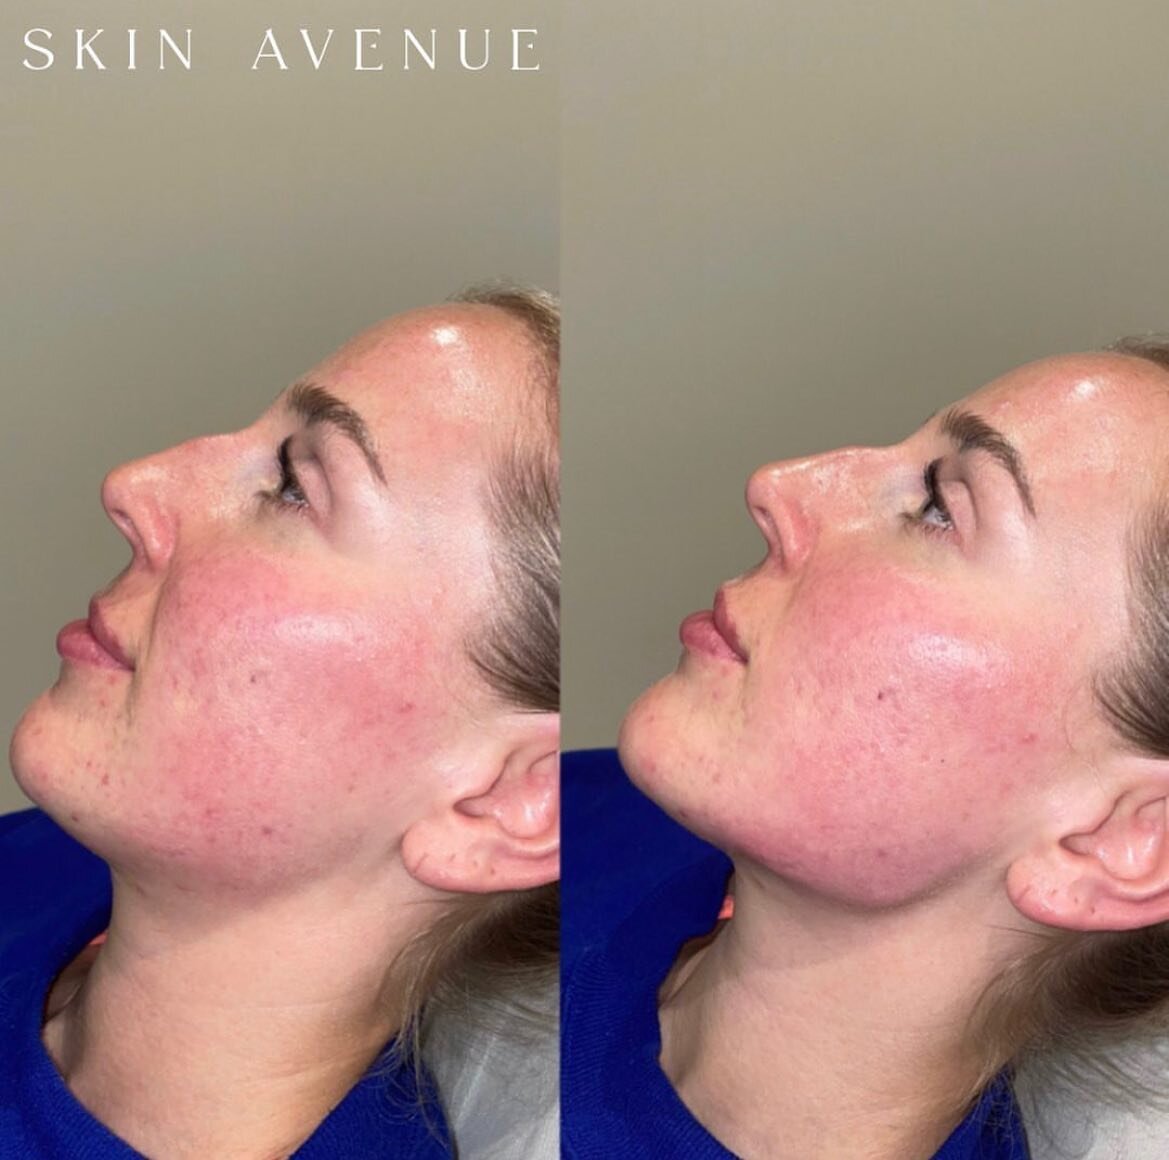 JAWLINE FILLER 🔥

Who can guess how many ml of filler was used to create this beautiful jawline? 🤎